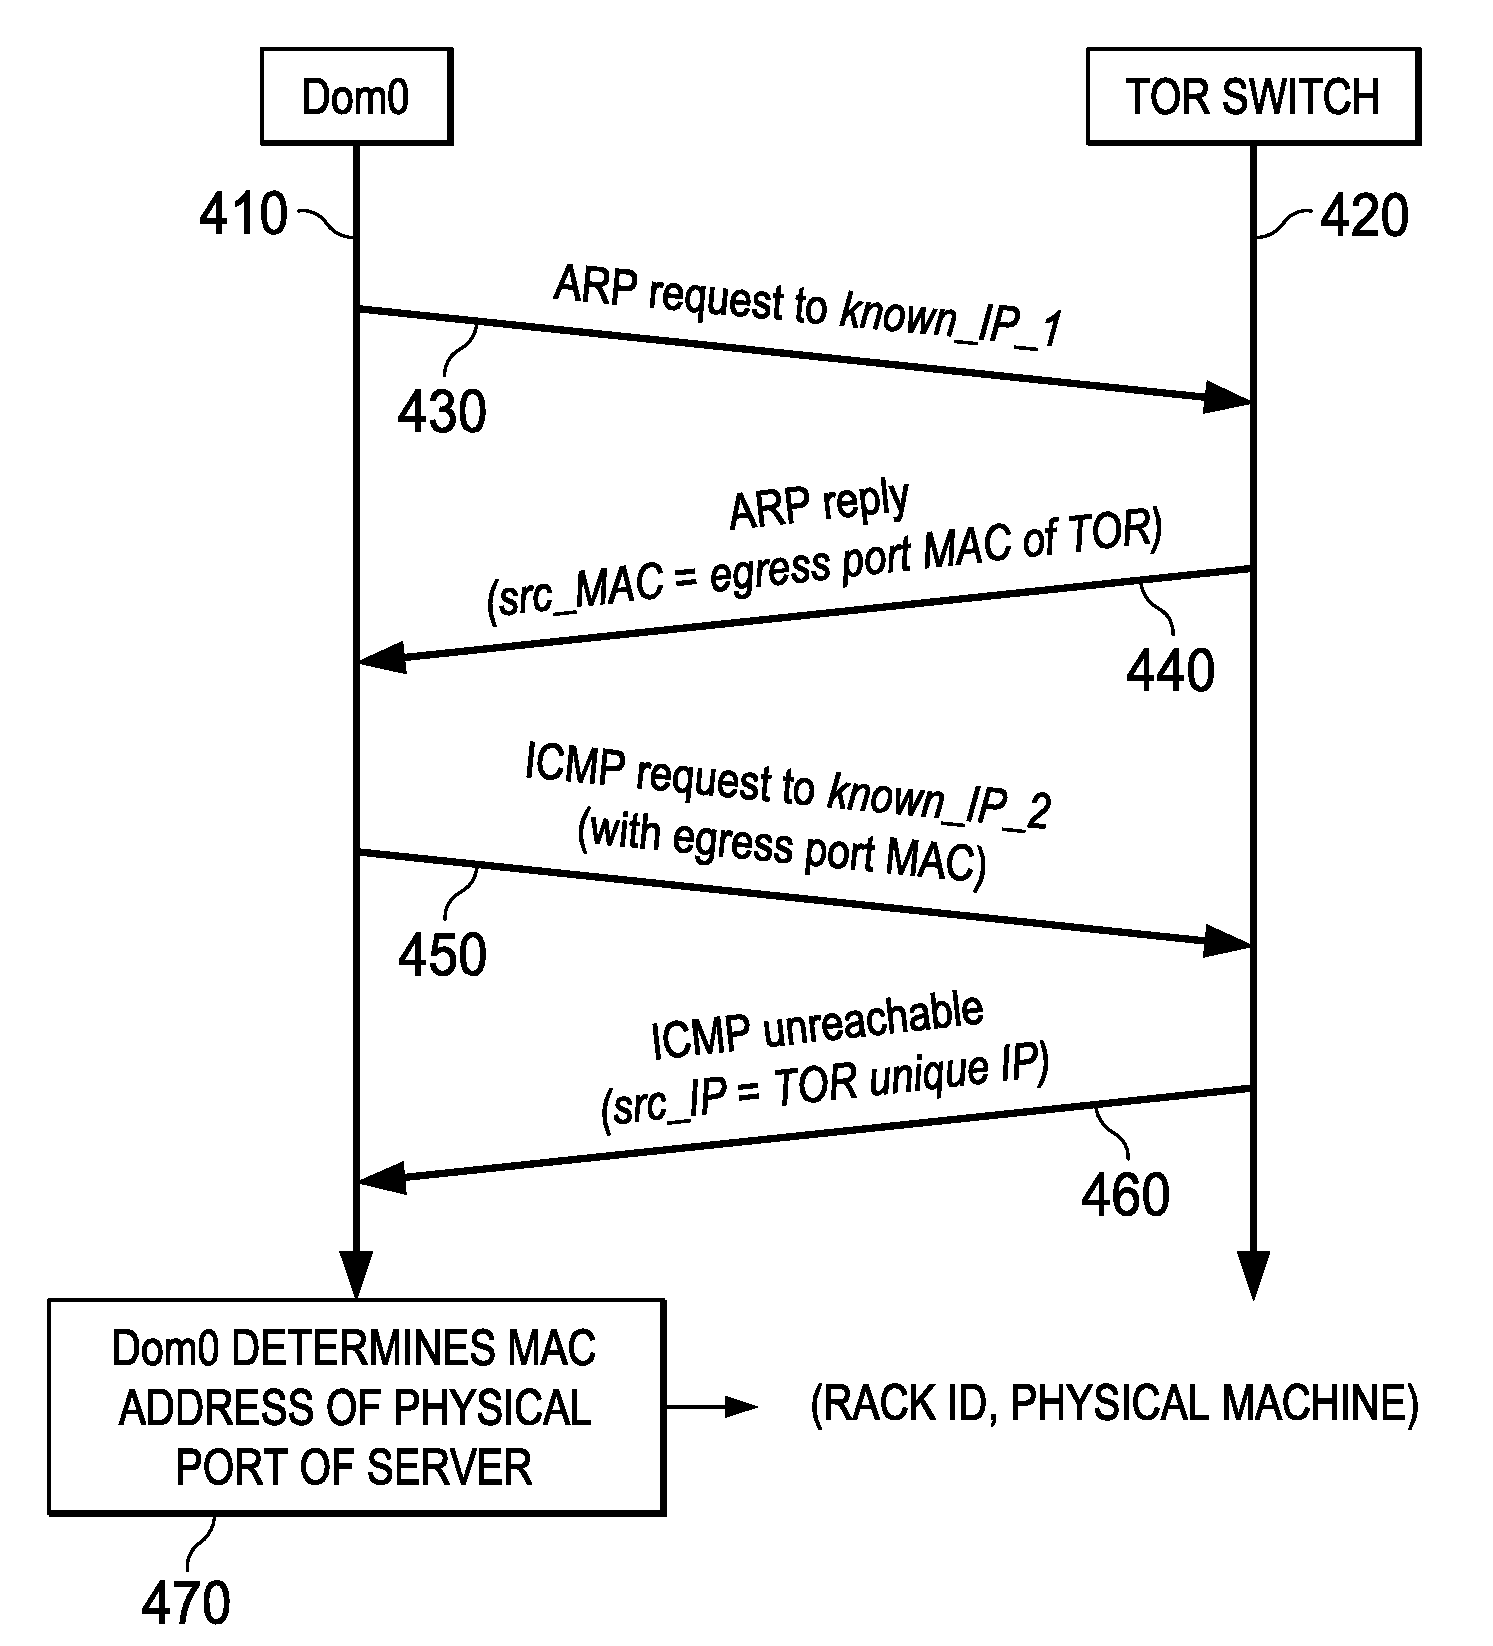 Systems and Methods for Automatic Rack Detection